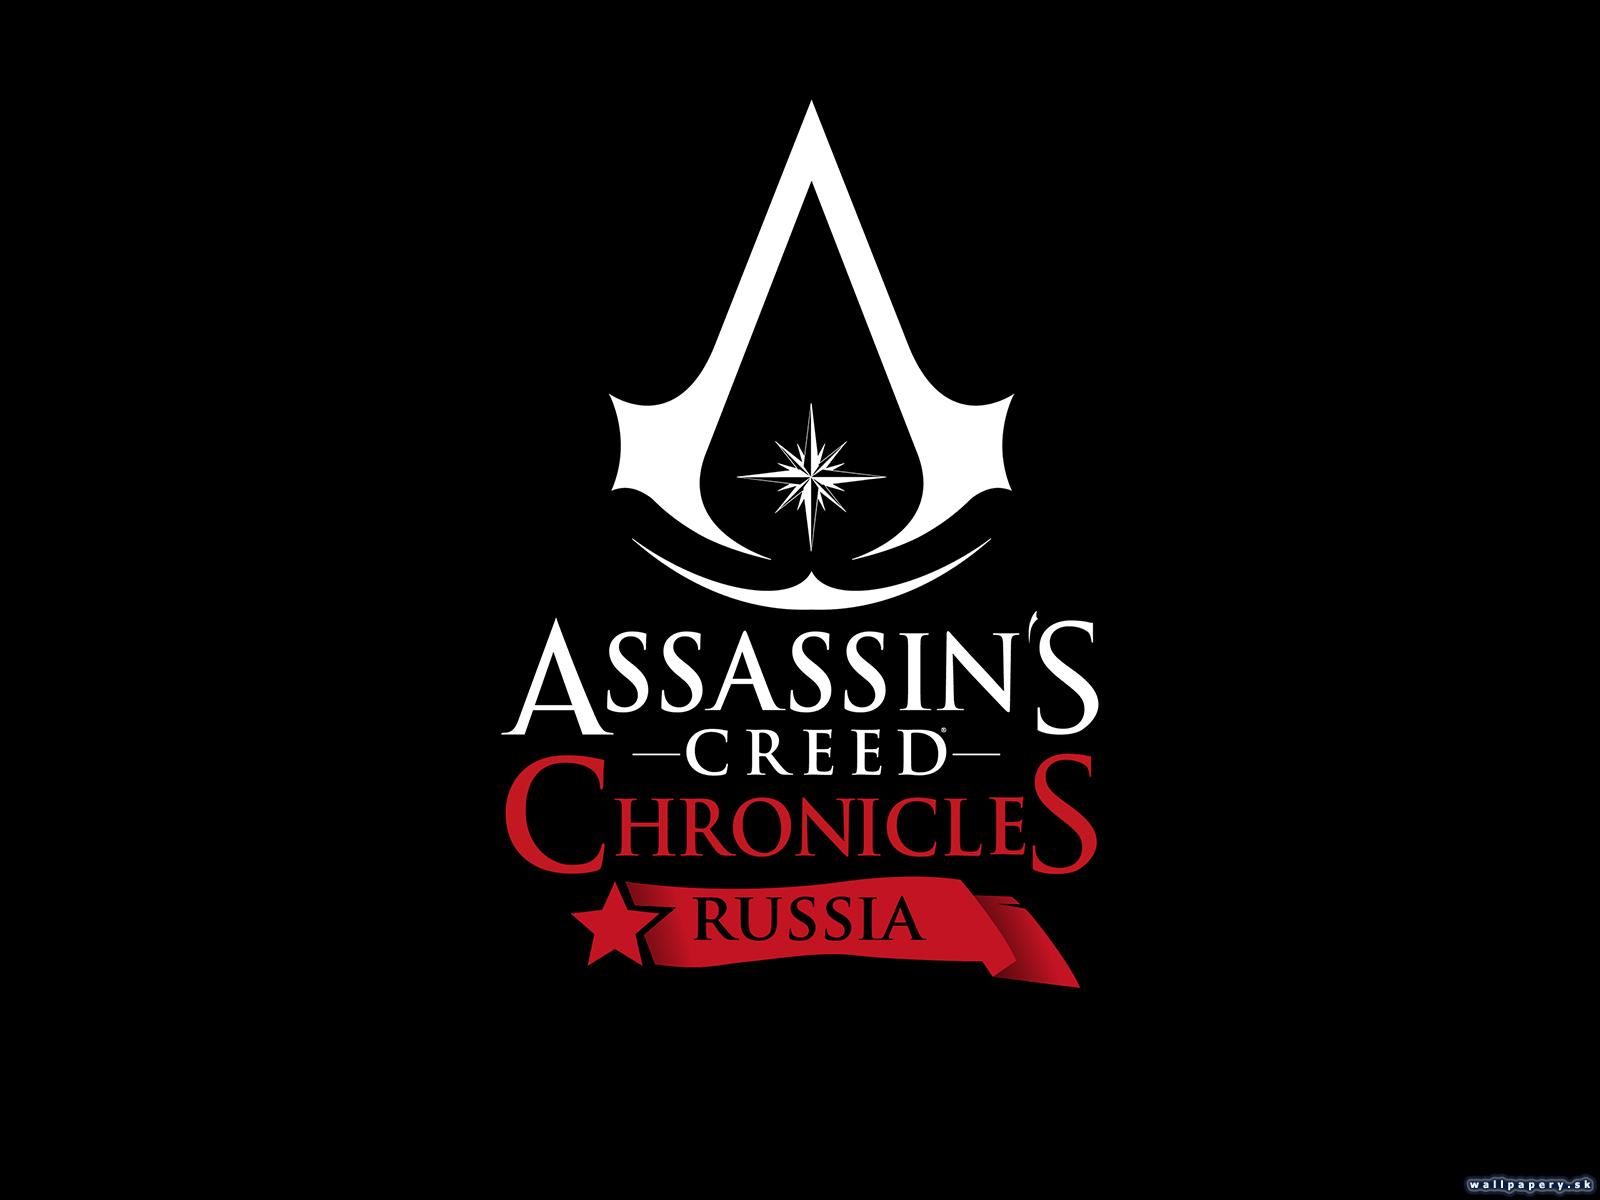 Assassin's Creed Chronicles: Russia - wallpaper 2